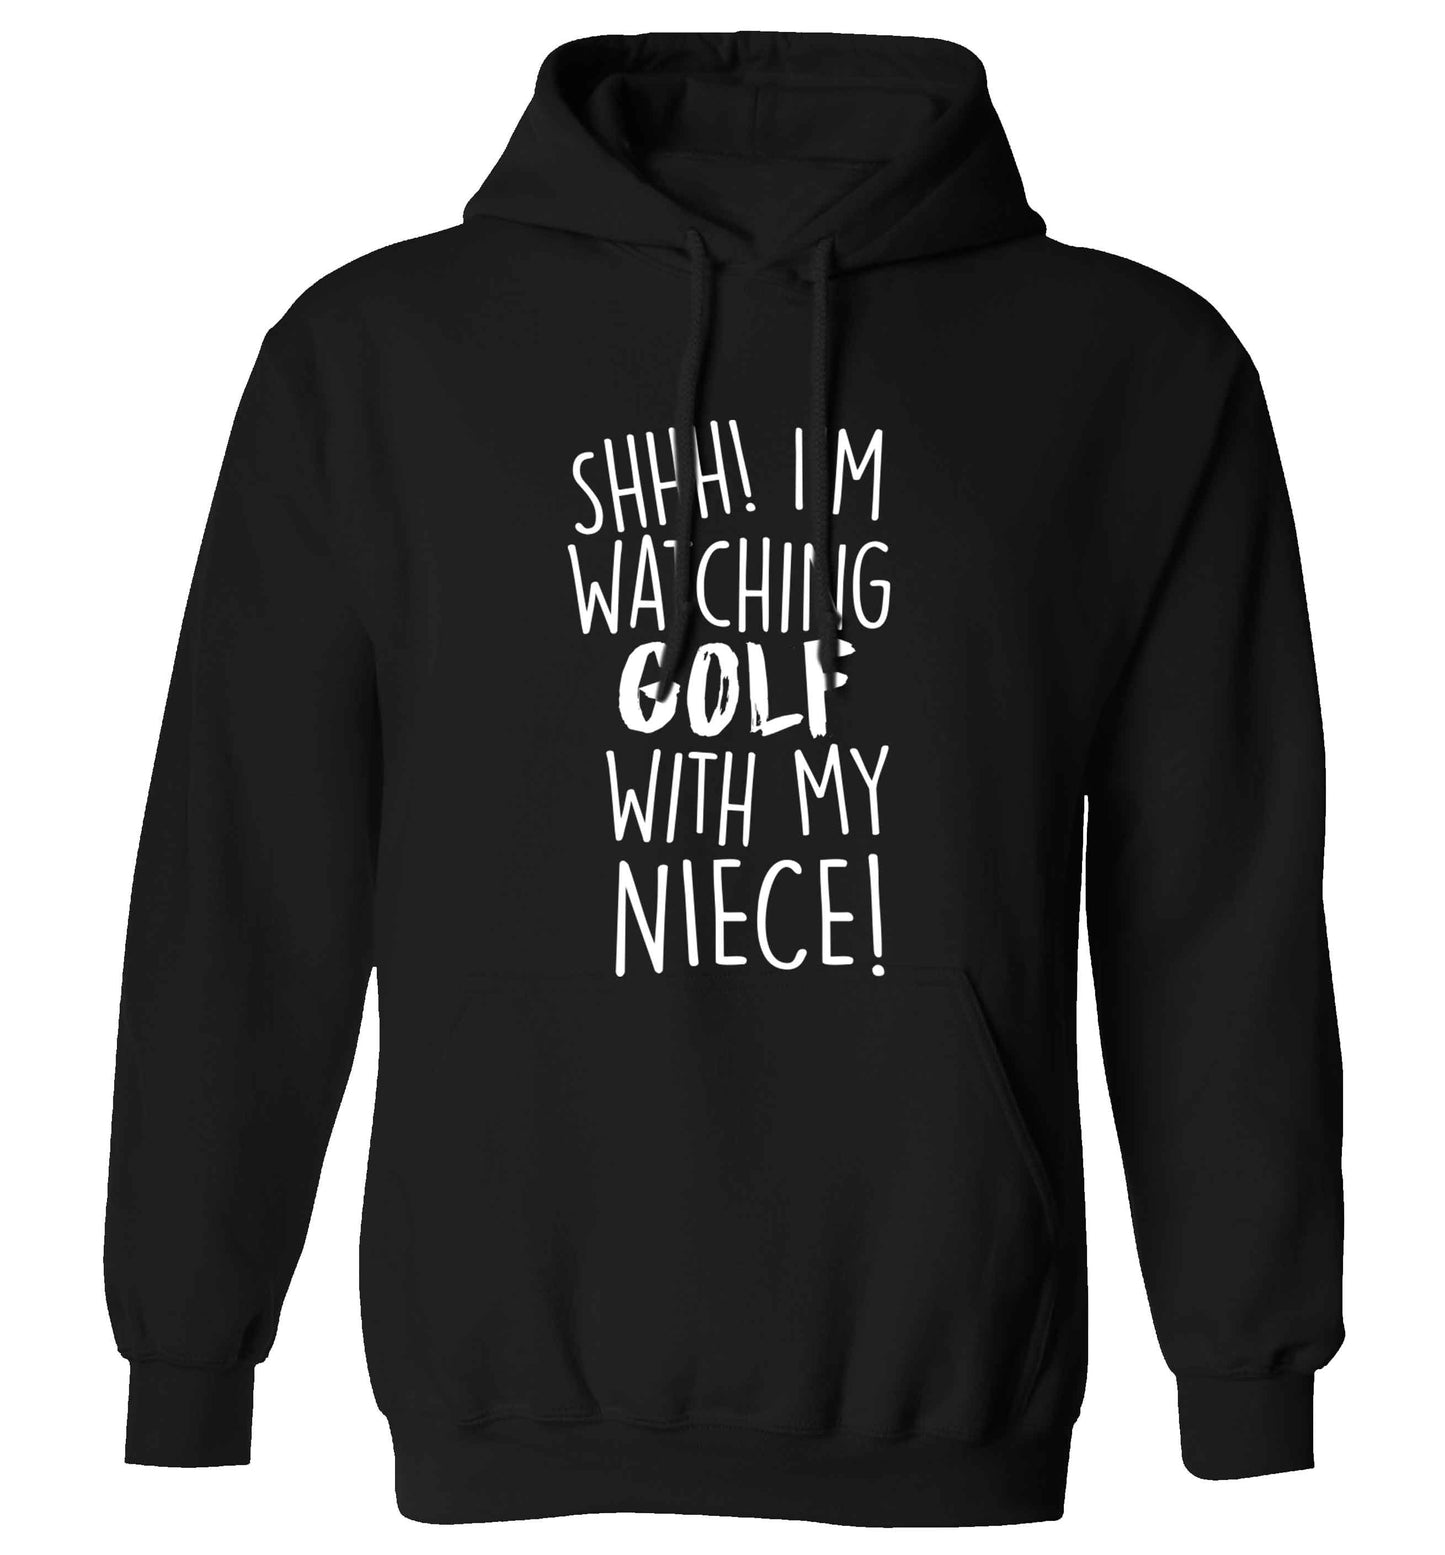 Shh I'm watching golf with my niece adults unisex black hoodie 2XL